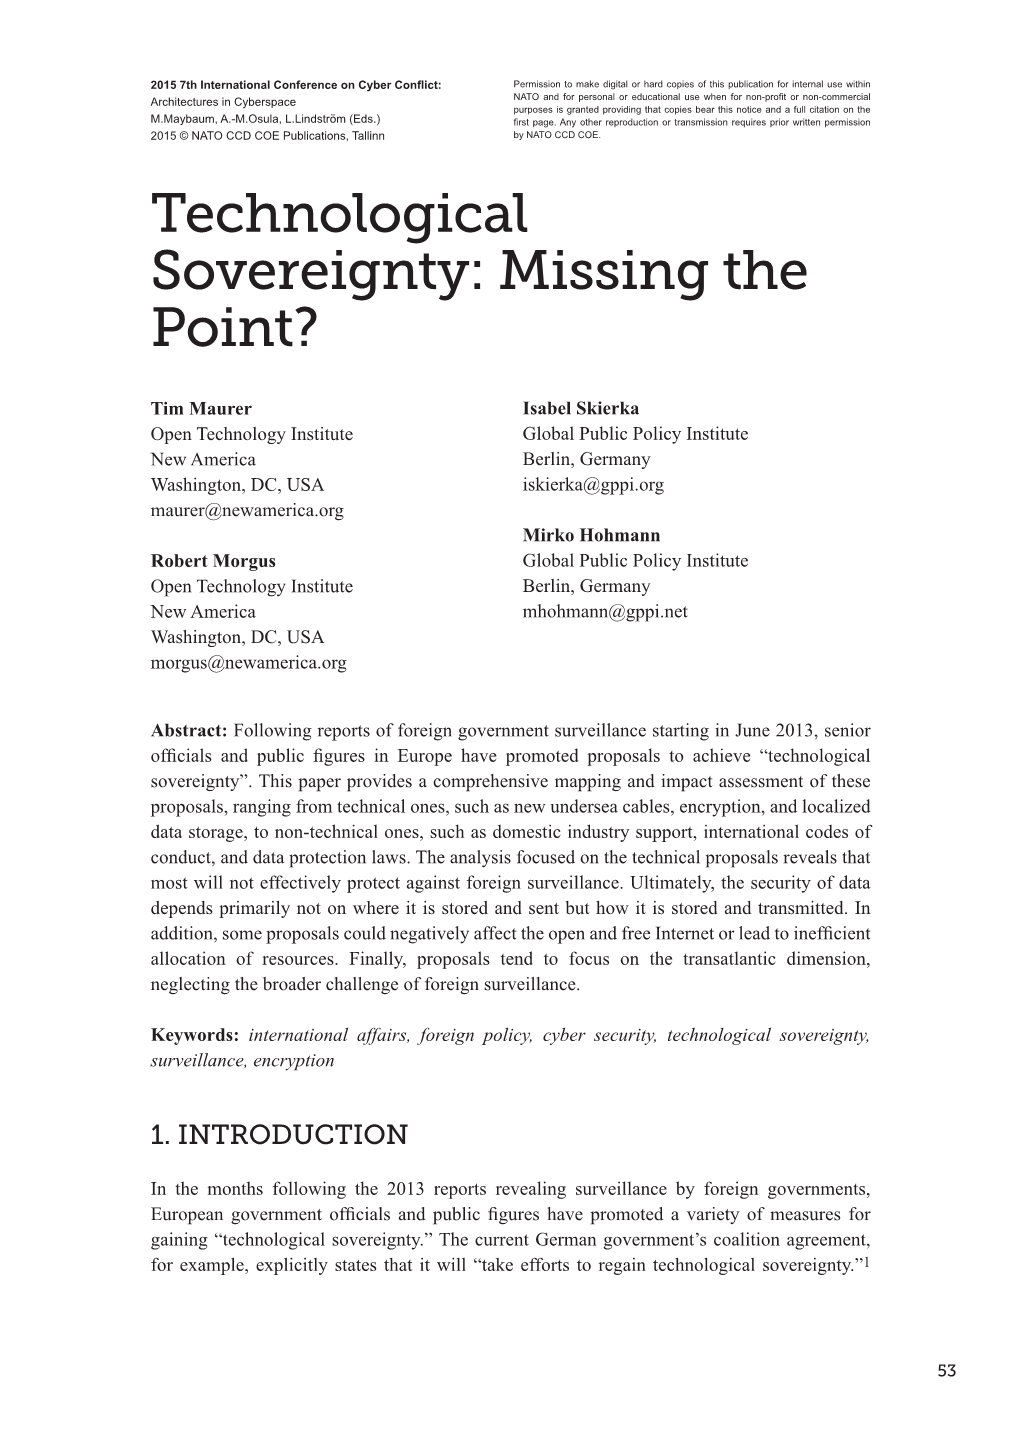 Technological Sovereignty: Missing the Point?